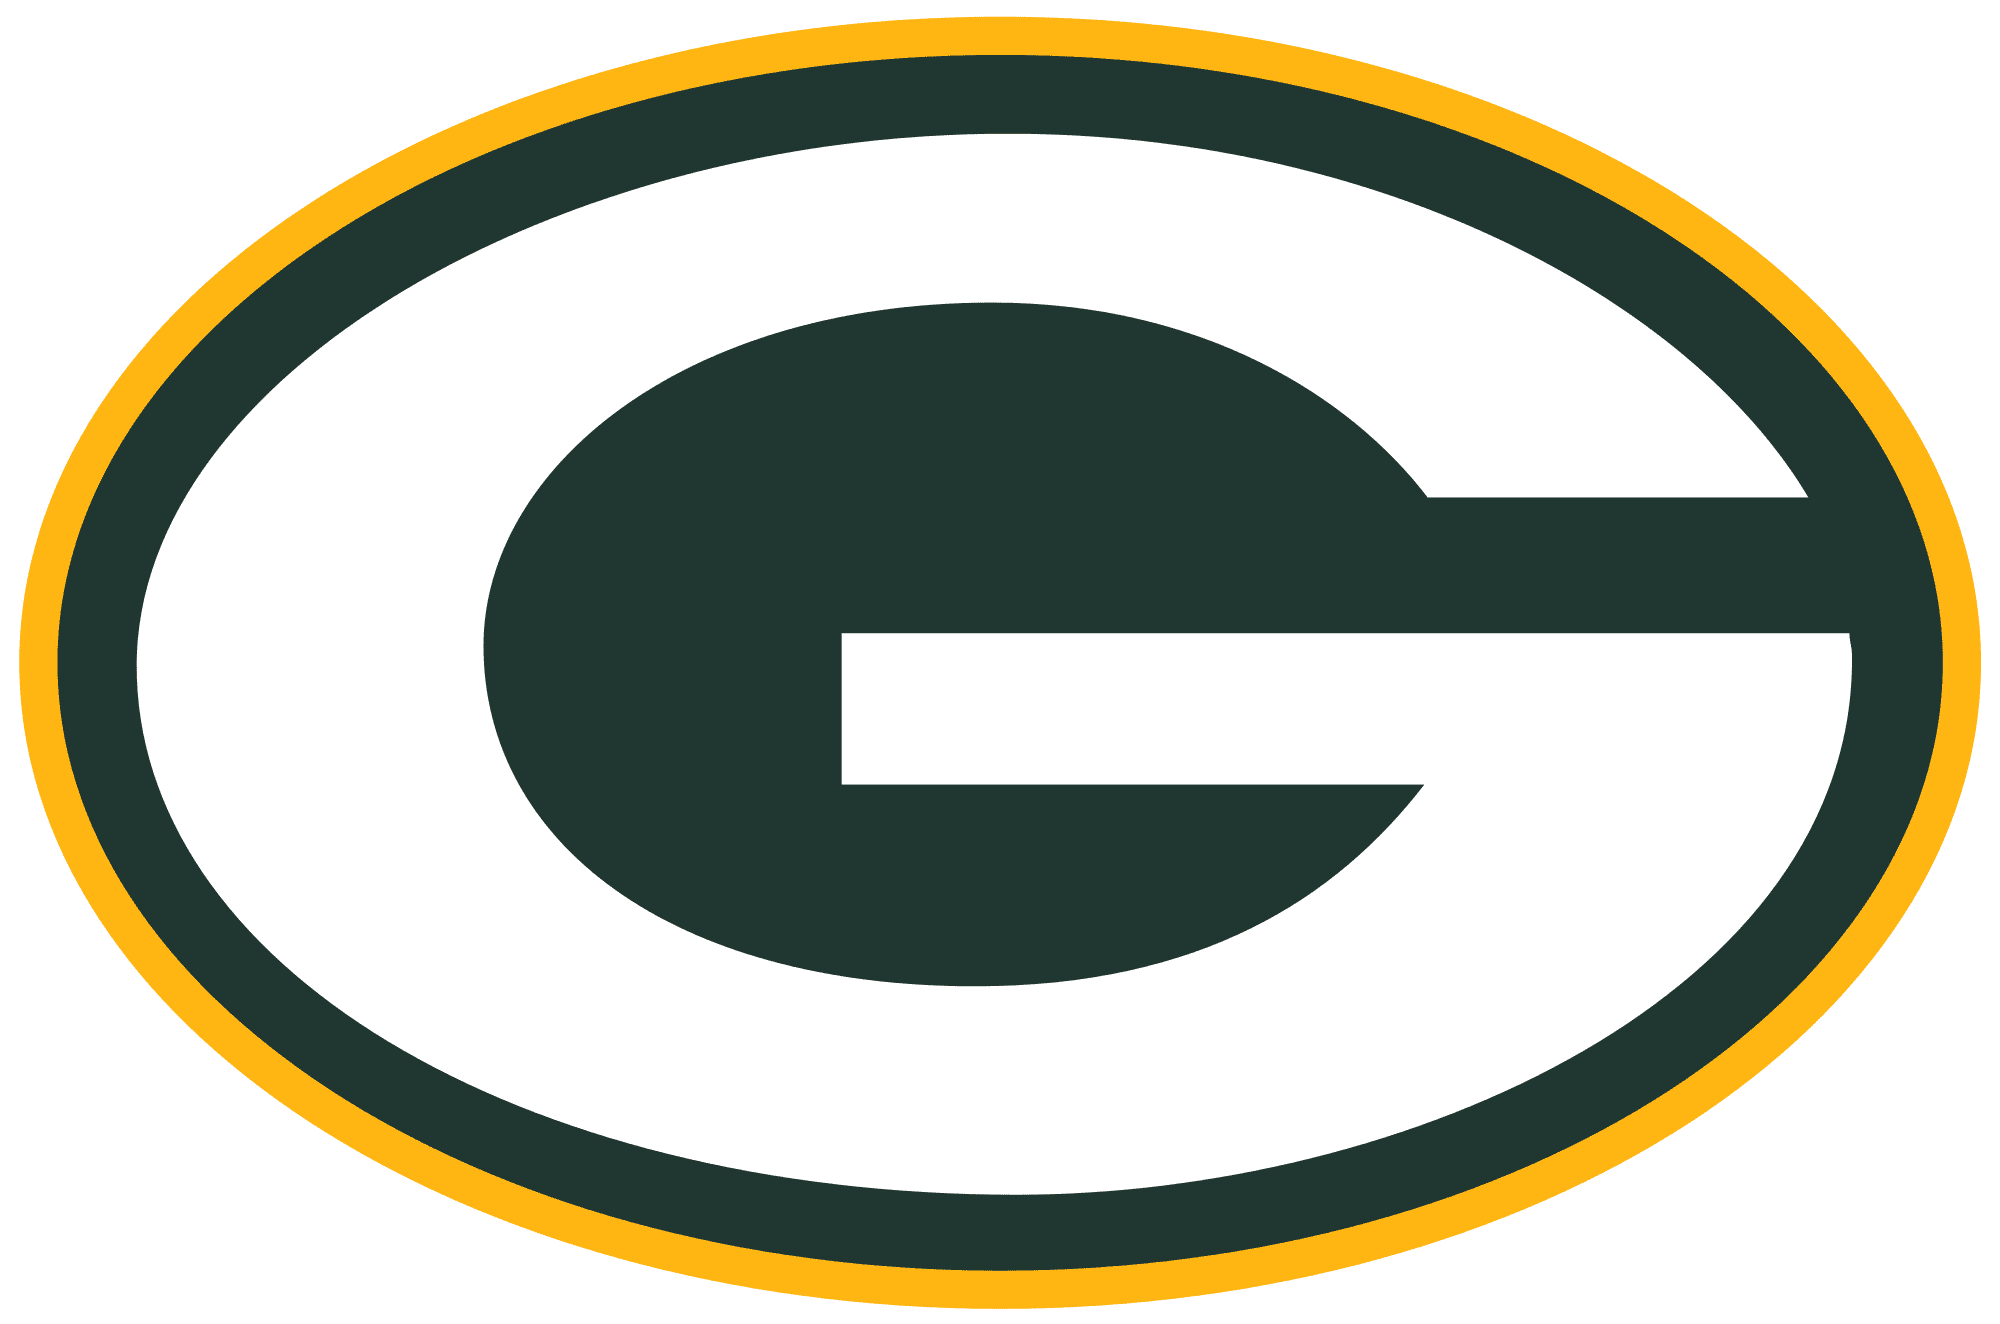 packers-logo